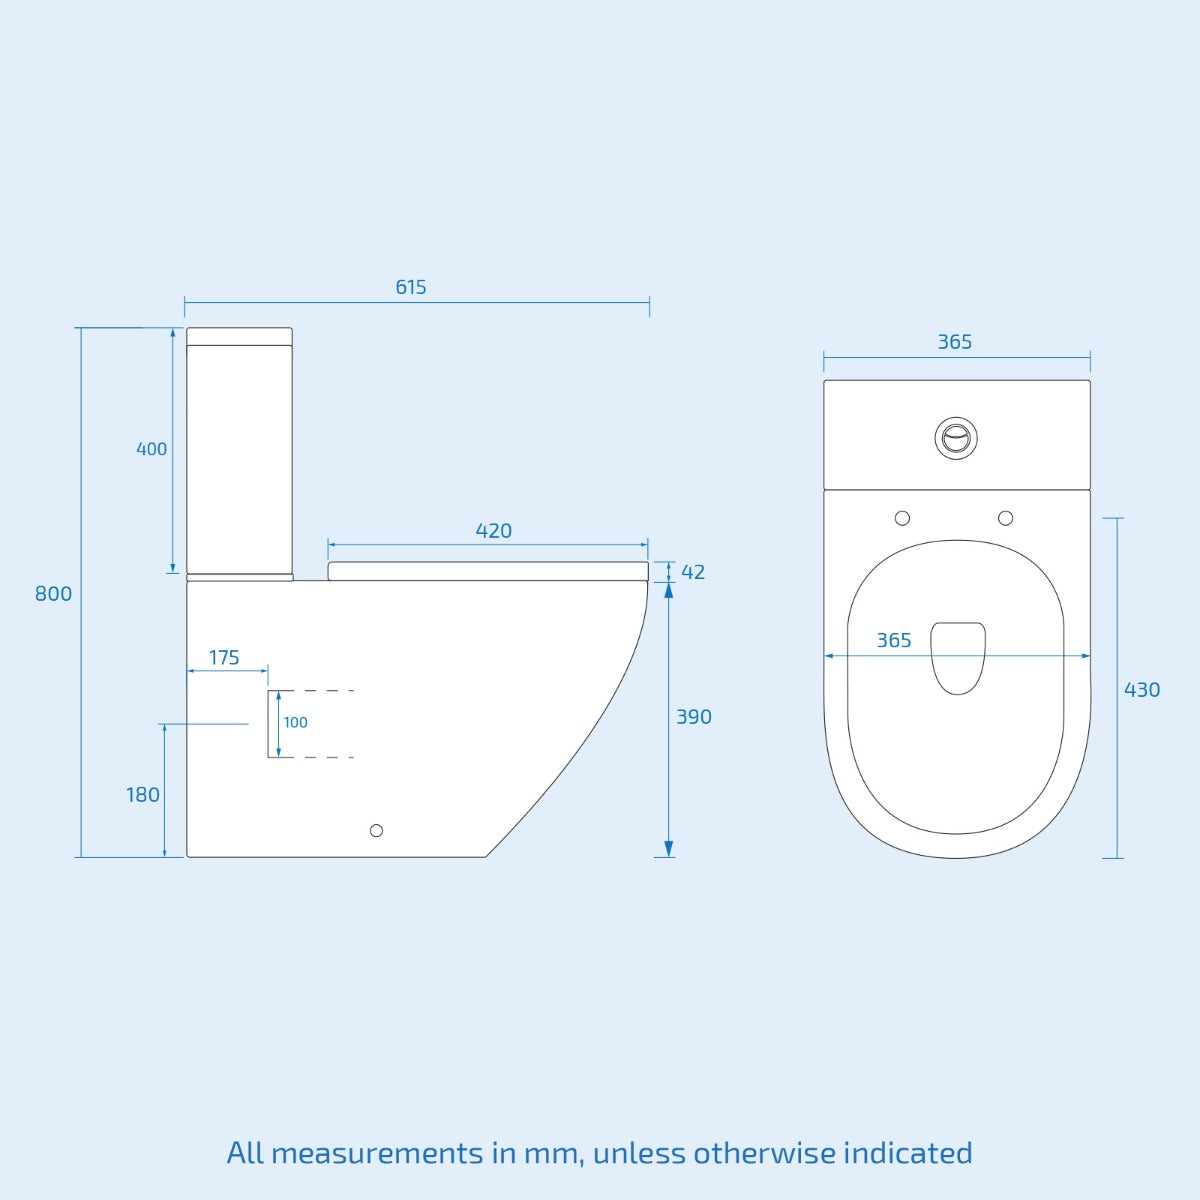 Magus Rimless Close Coupled Toilet with Soft Closing Seat